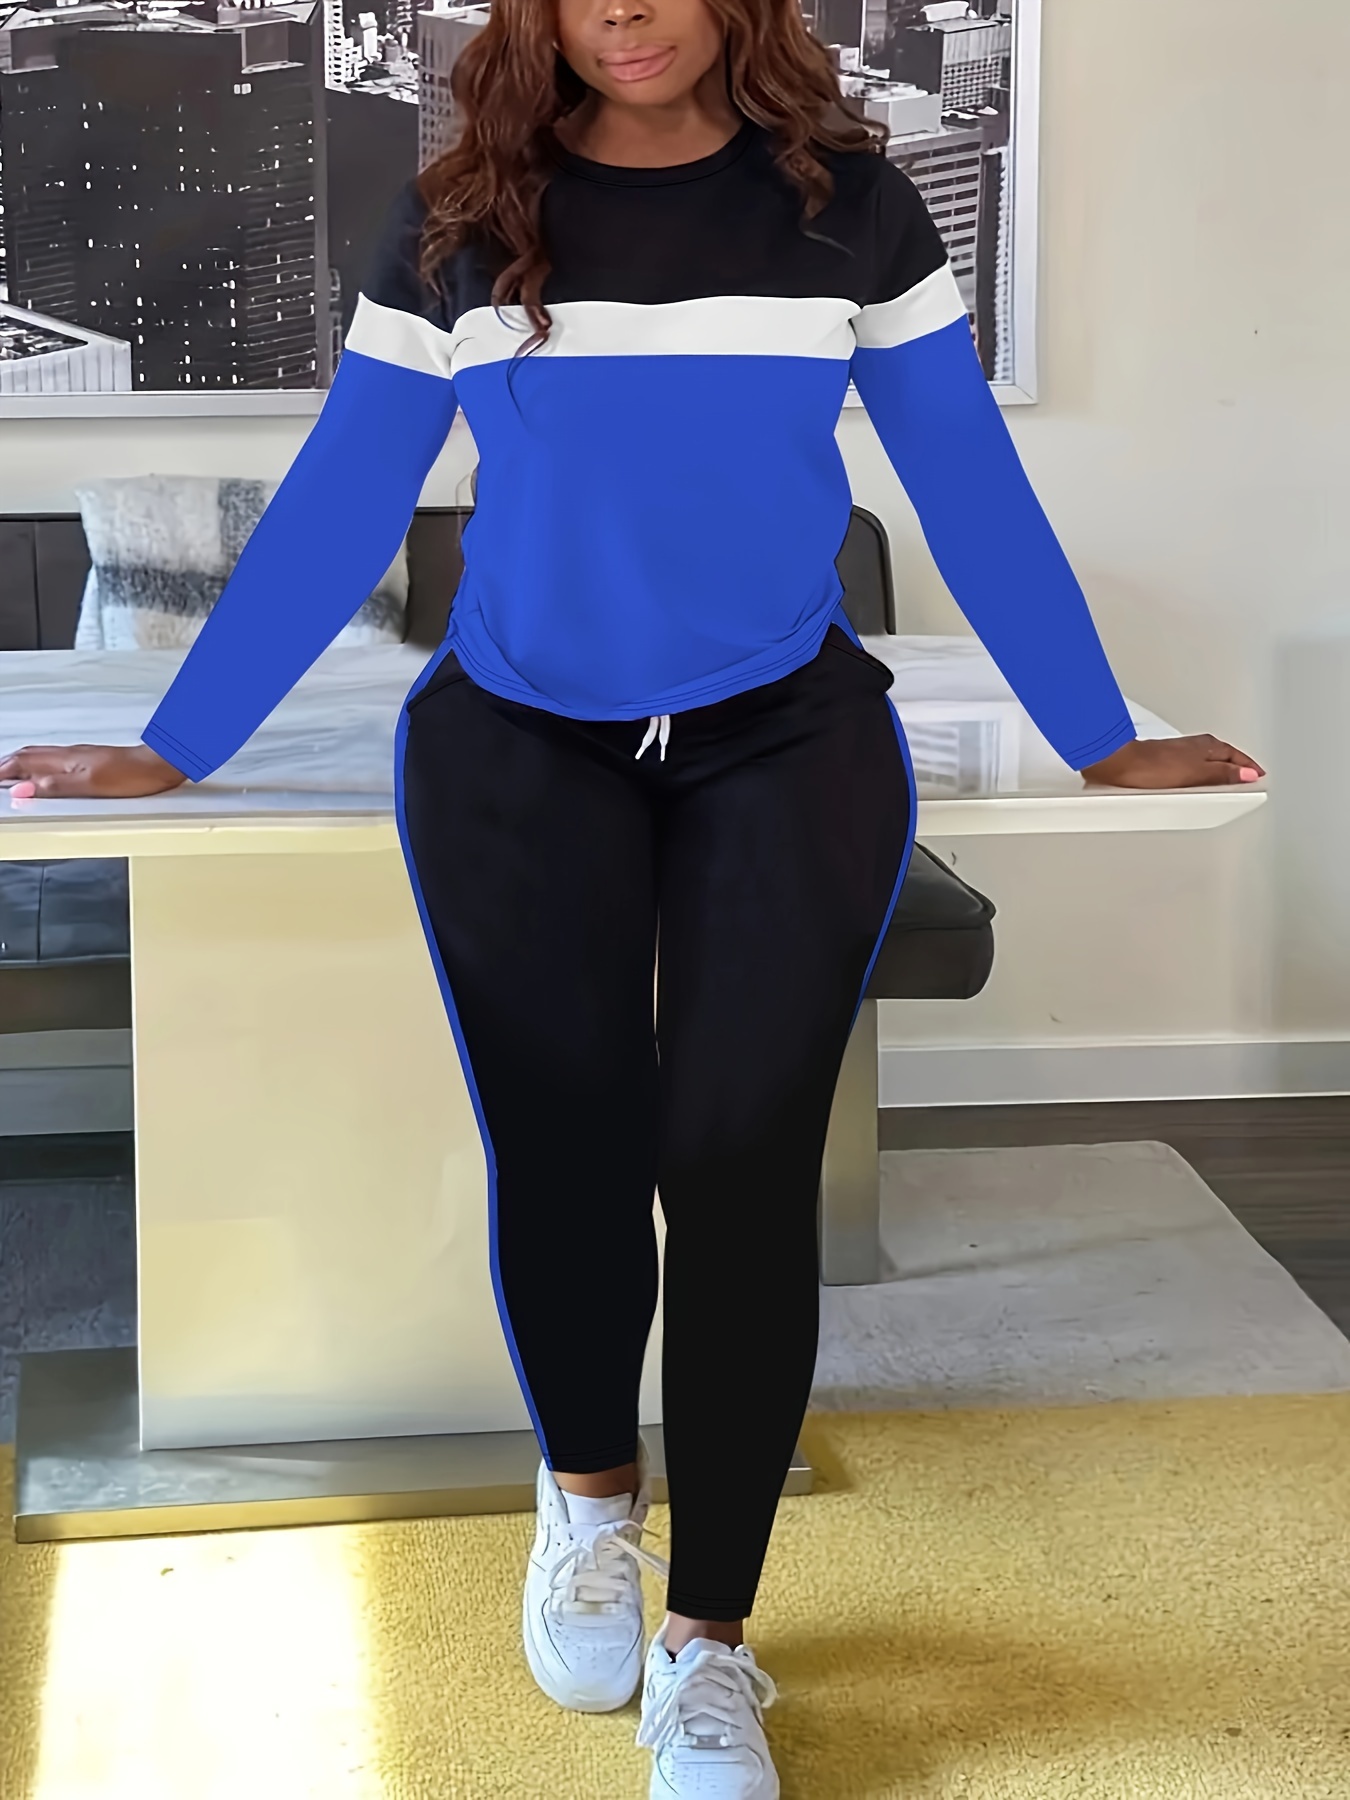 Fashion Plus Size Women Fashion Sexy V-Neck Solid Color Leggings Casual Two  Piece Set - The Little Connection